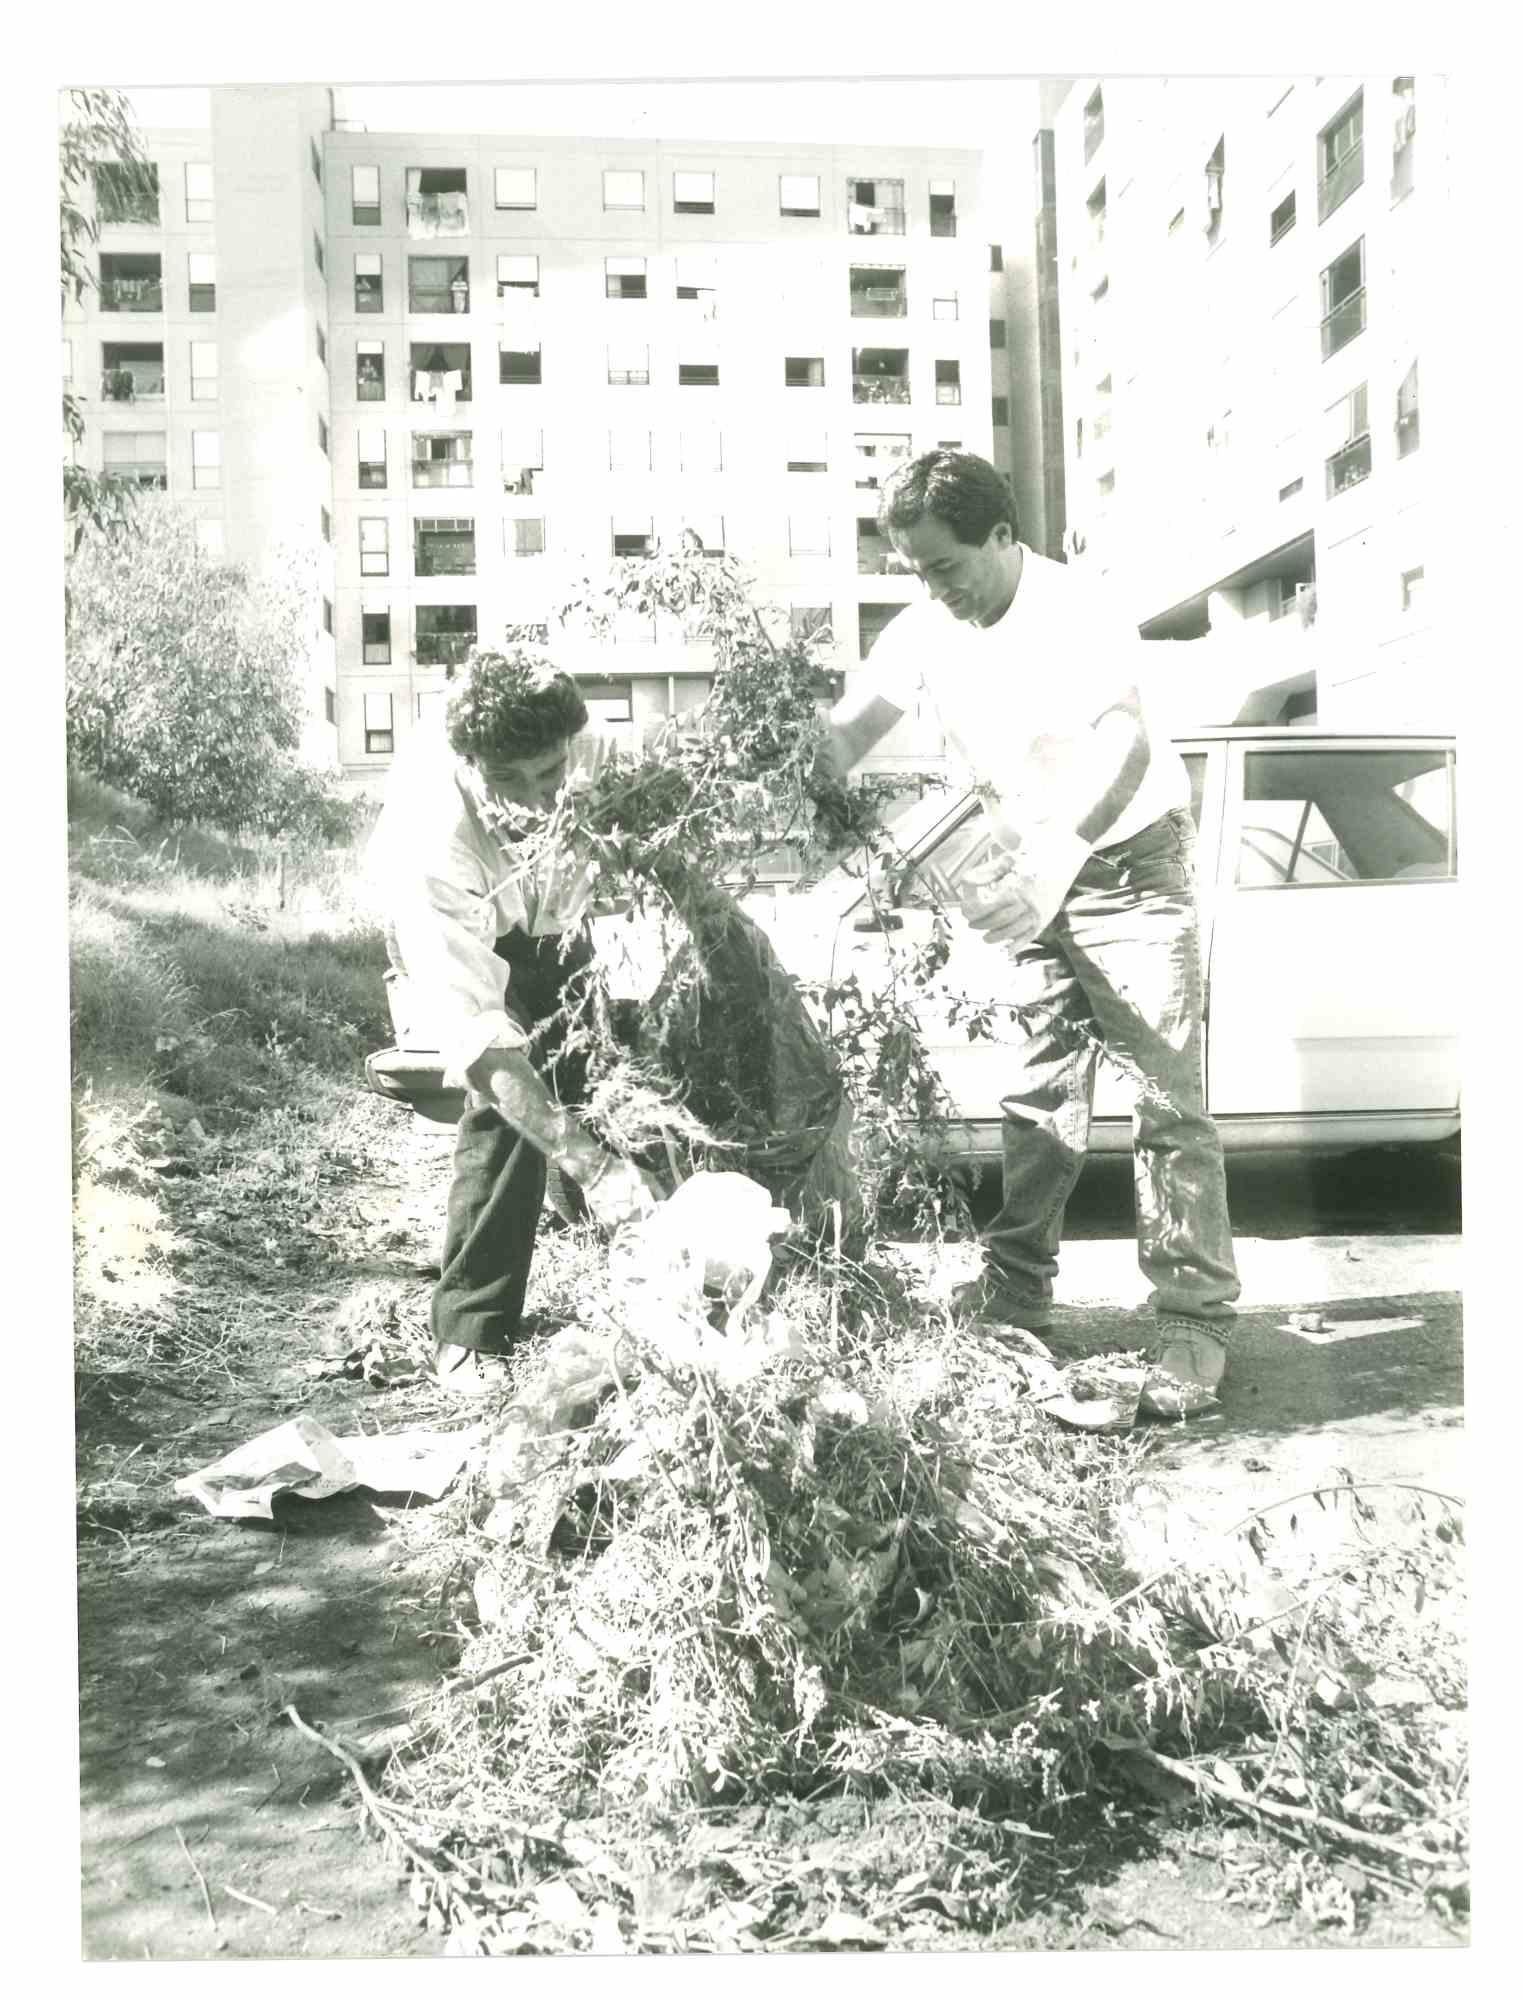 Unknown Figurative Photograph - Historical Photo of Prisons  - Cleaning Via Nomentana in Rome - 1970s